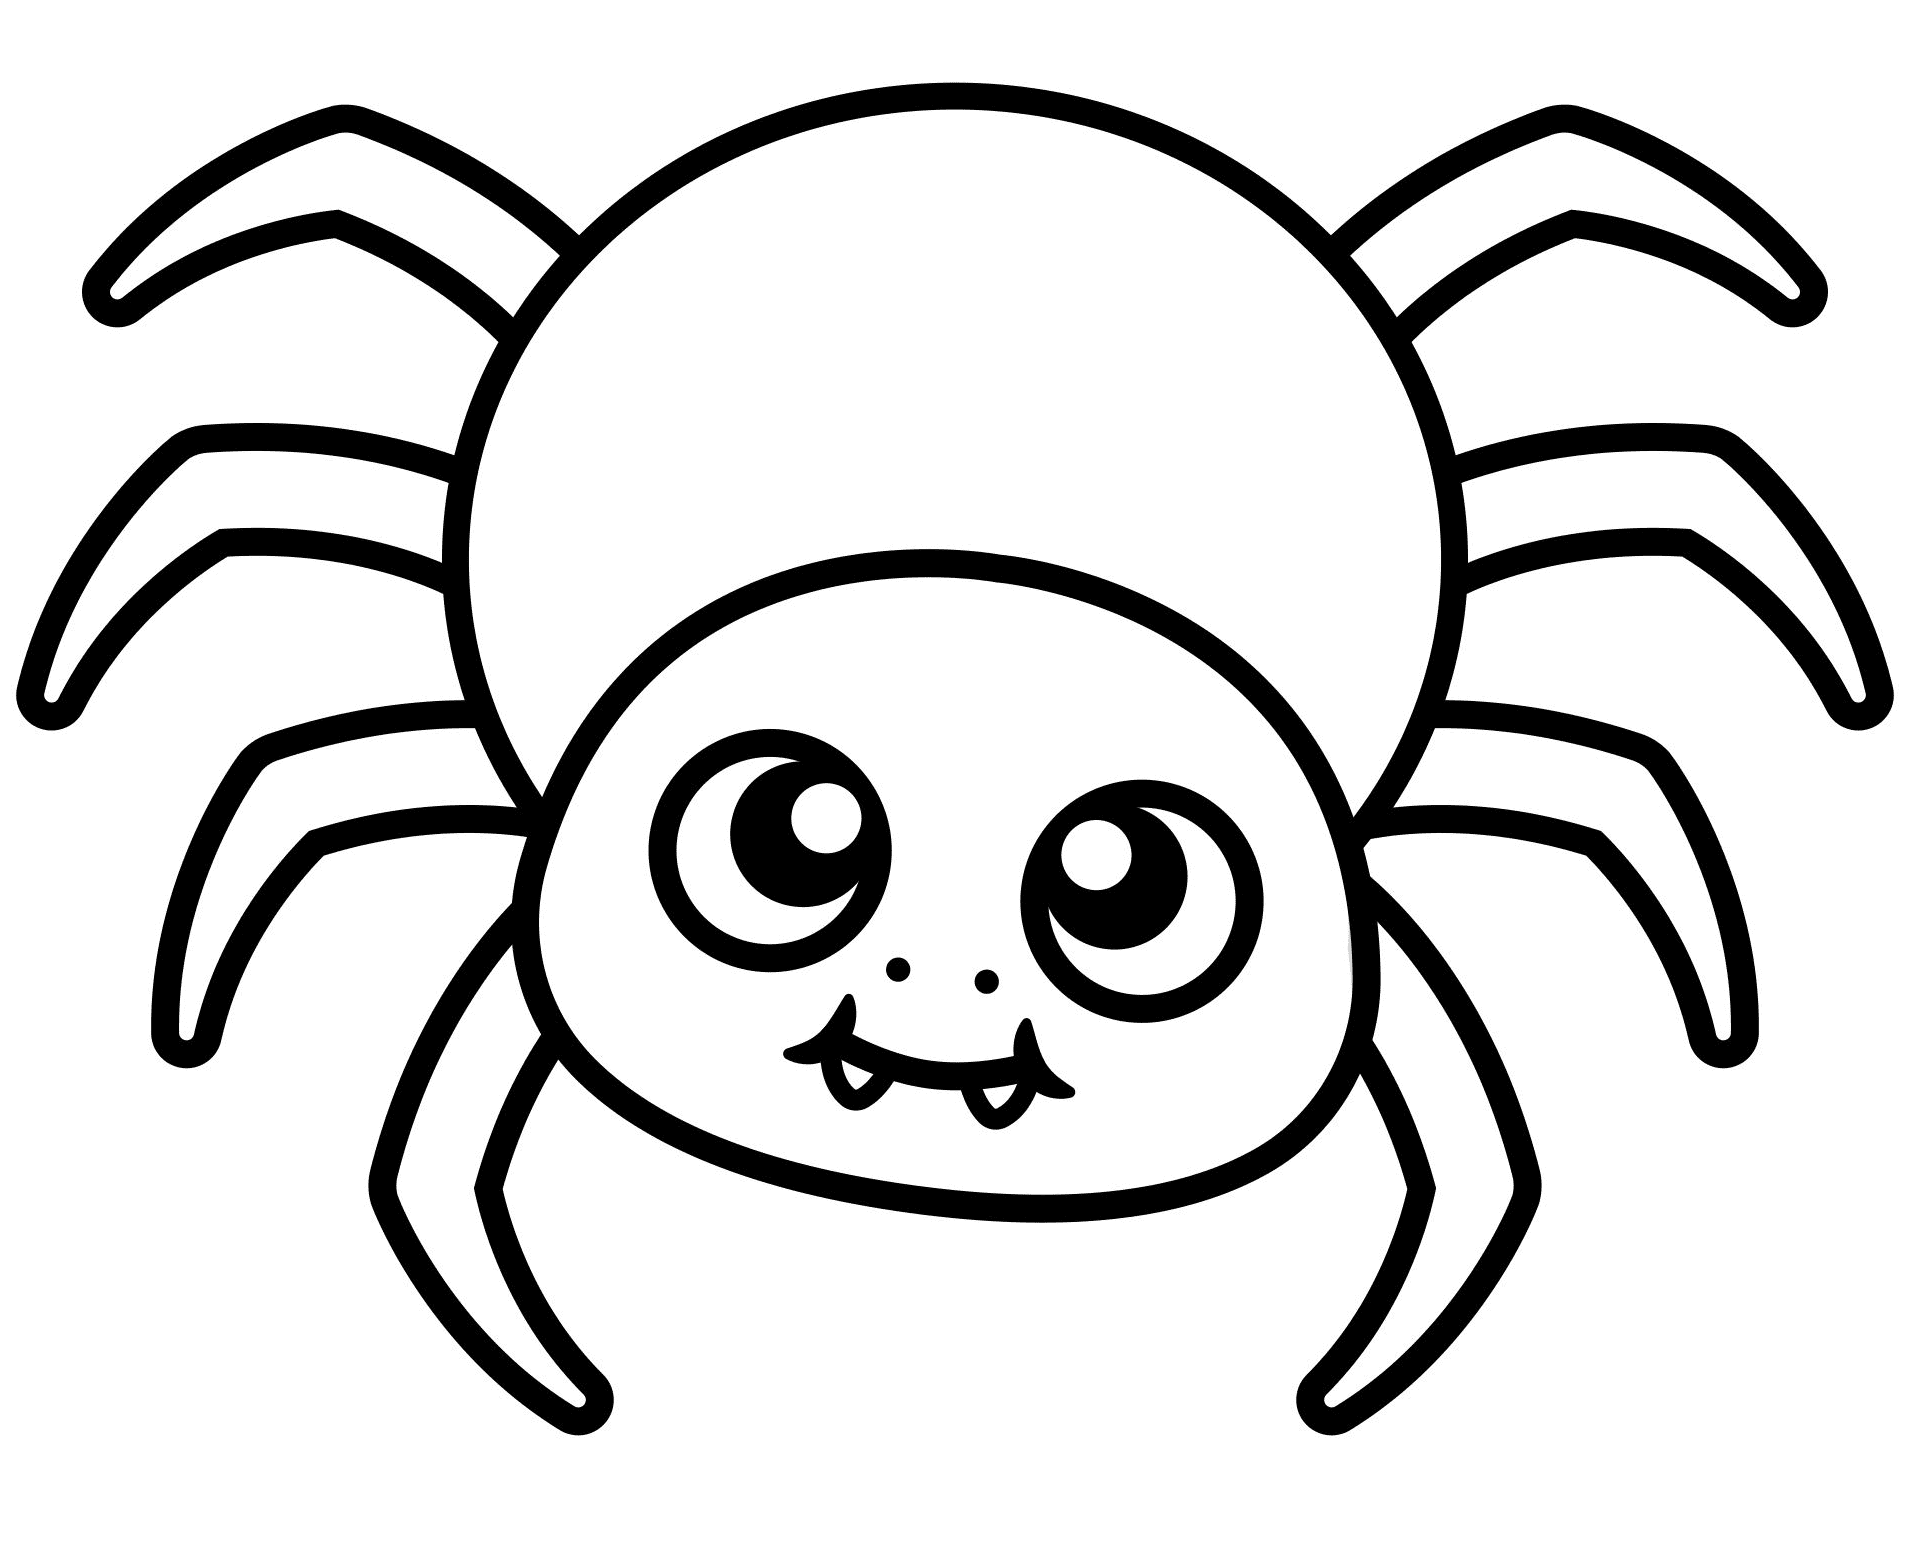 incy-wincy-spider-colouring-pages